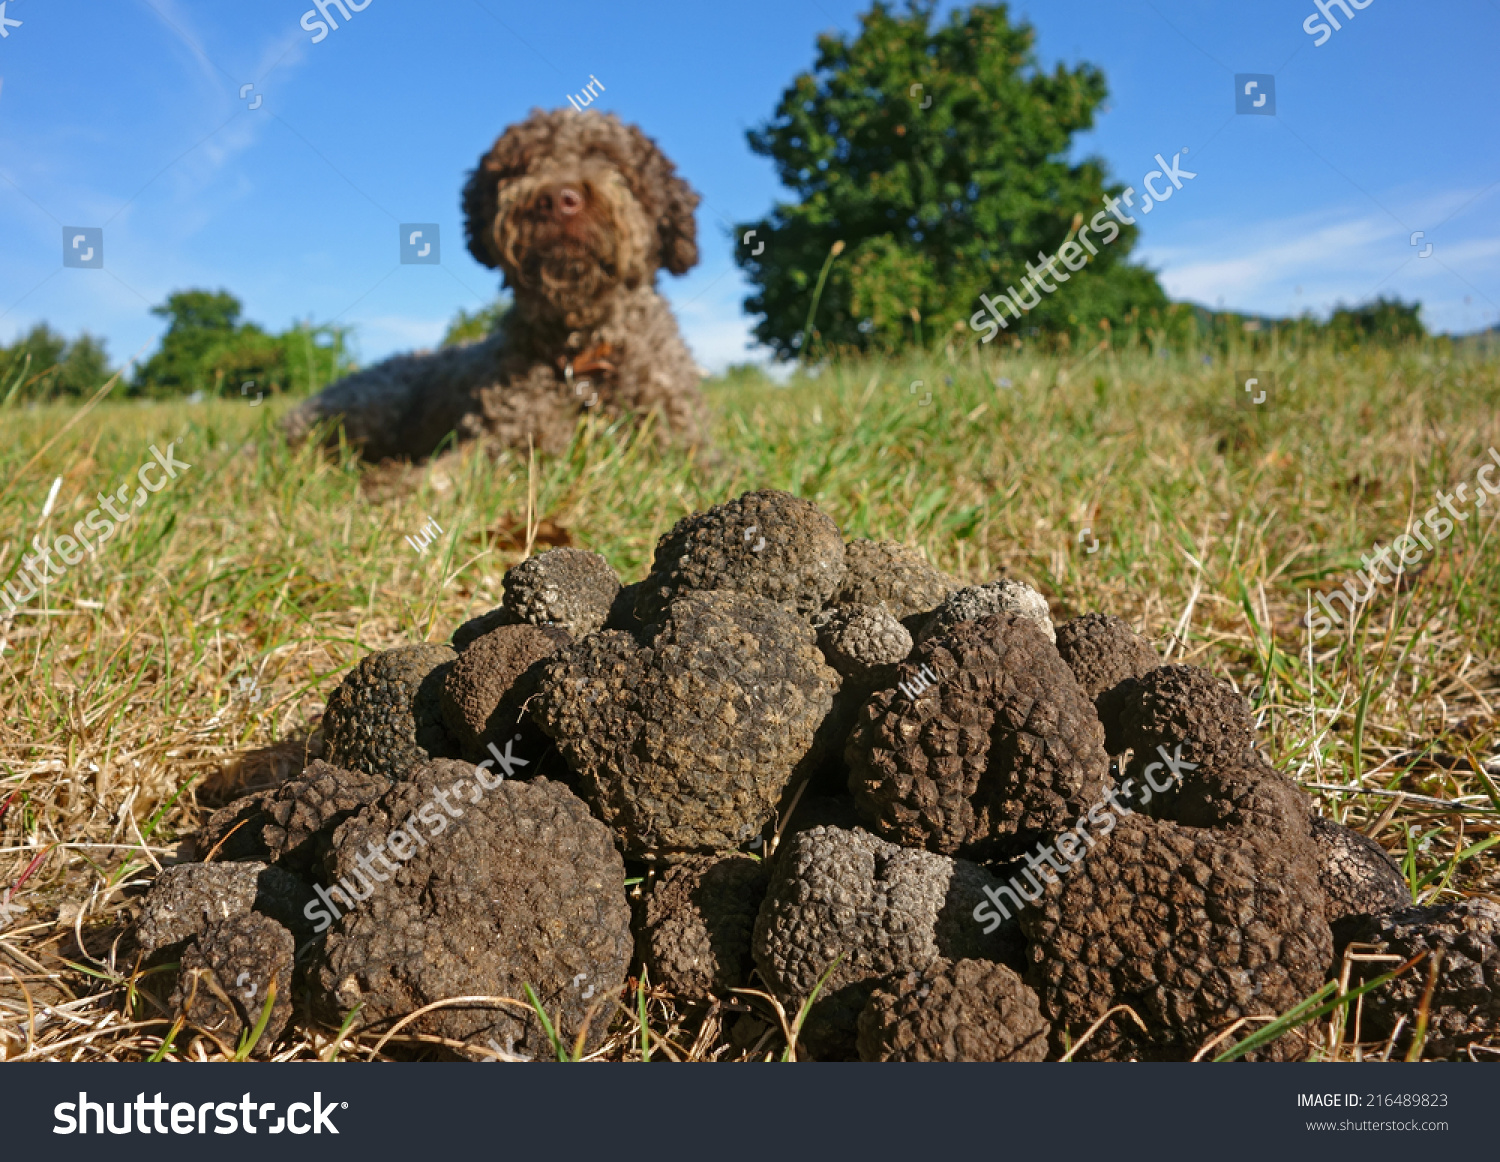 stock-photo-just-picked-black-truffles-dog-in-the-background-216489823.jpg